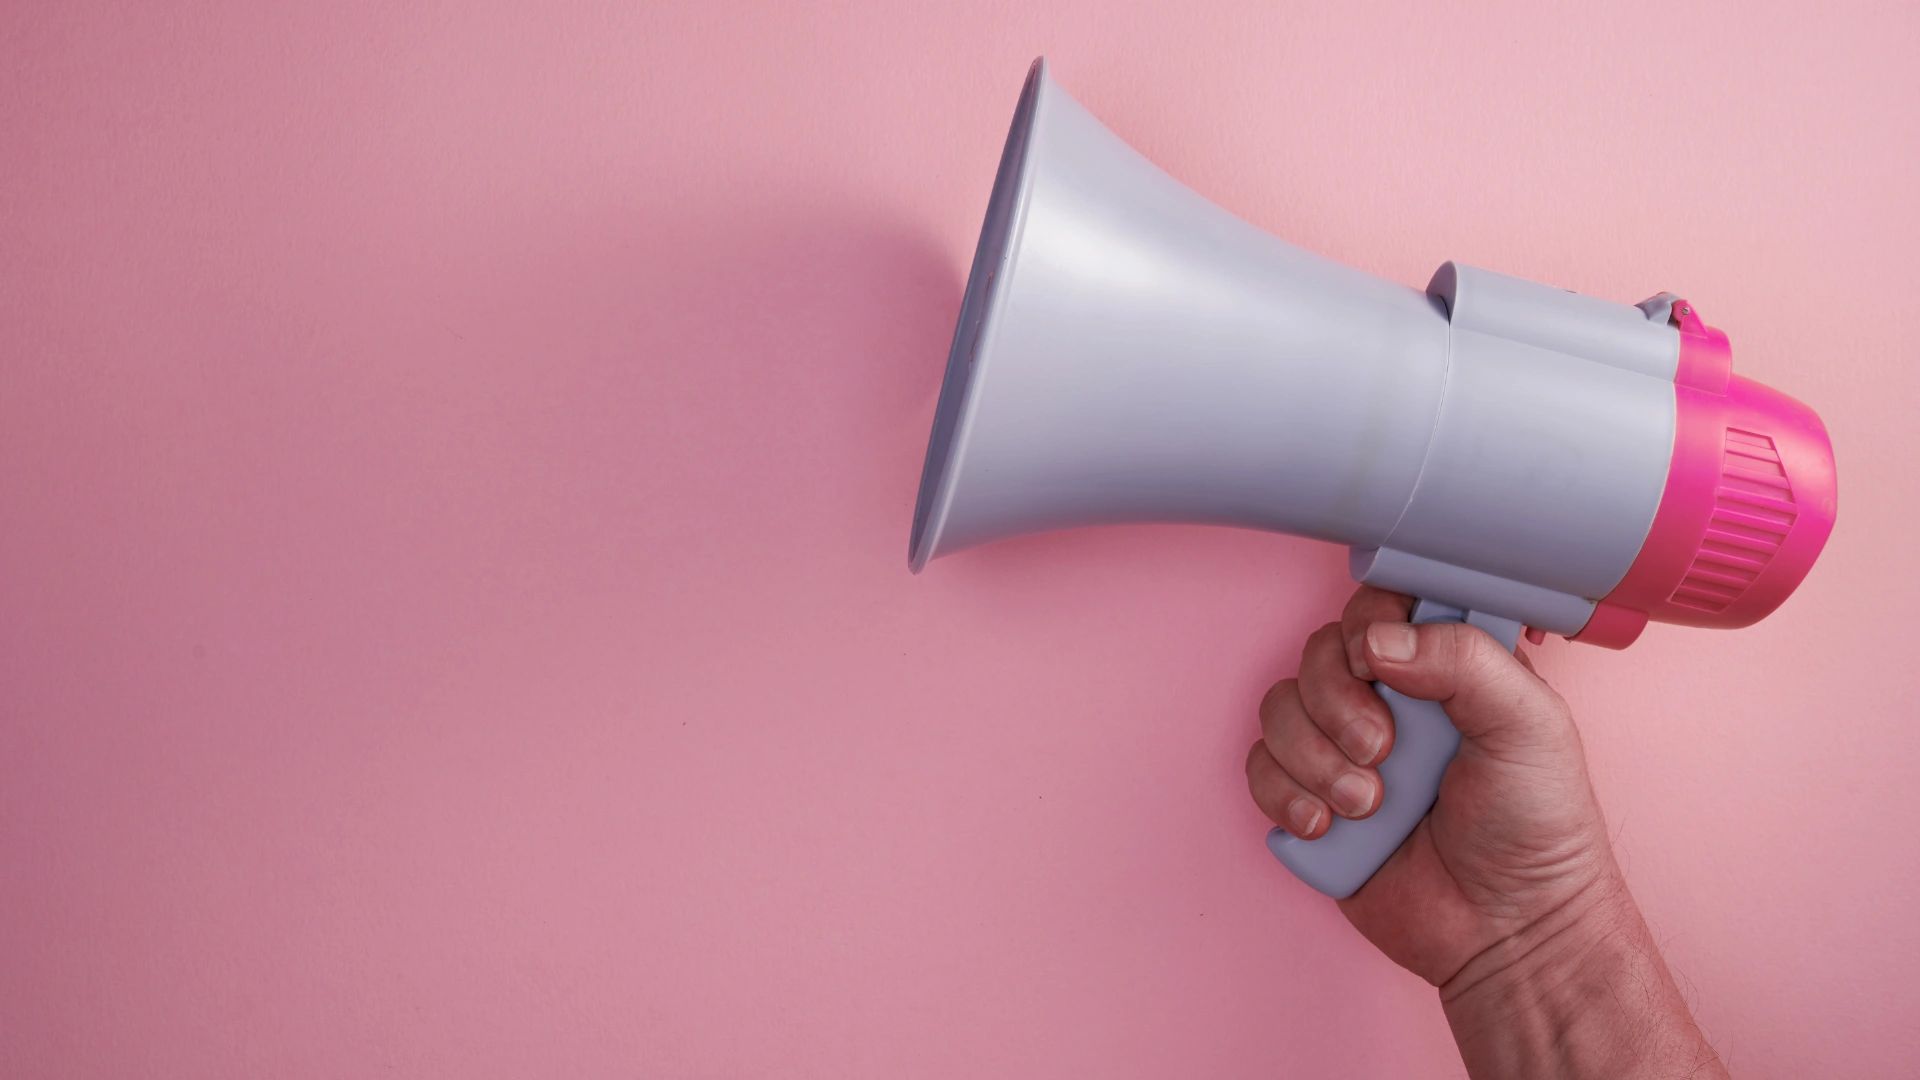 megaphone in a pink background, with a hand holding it